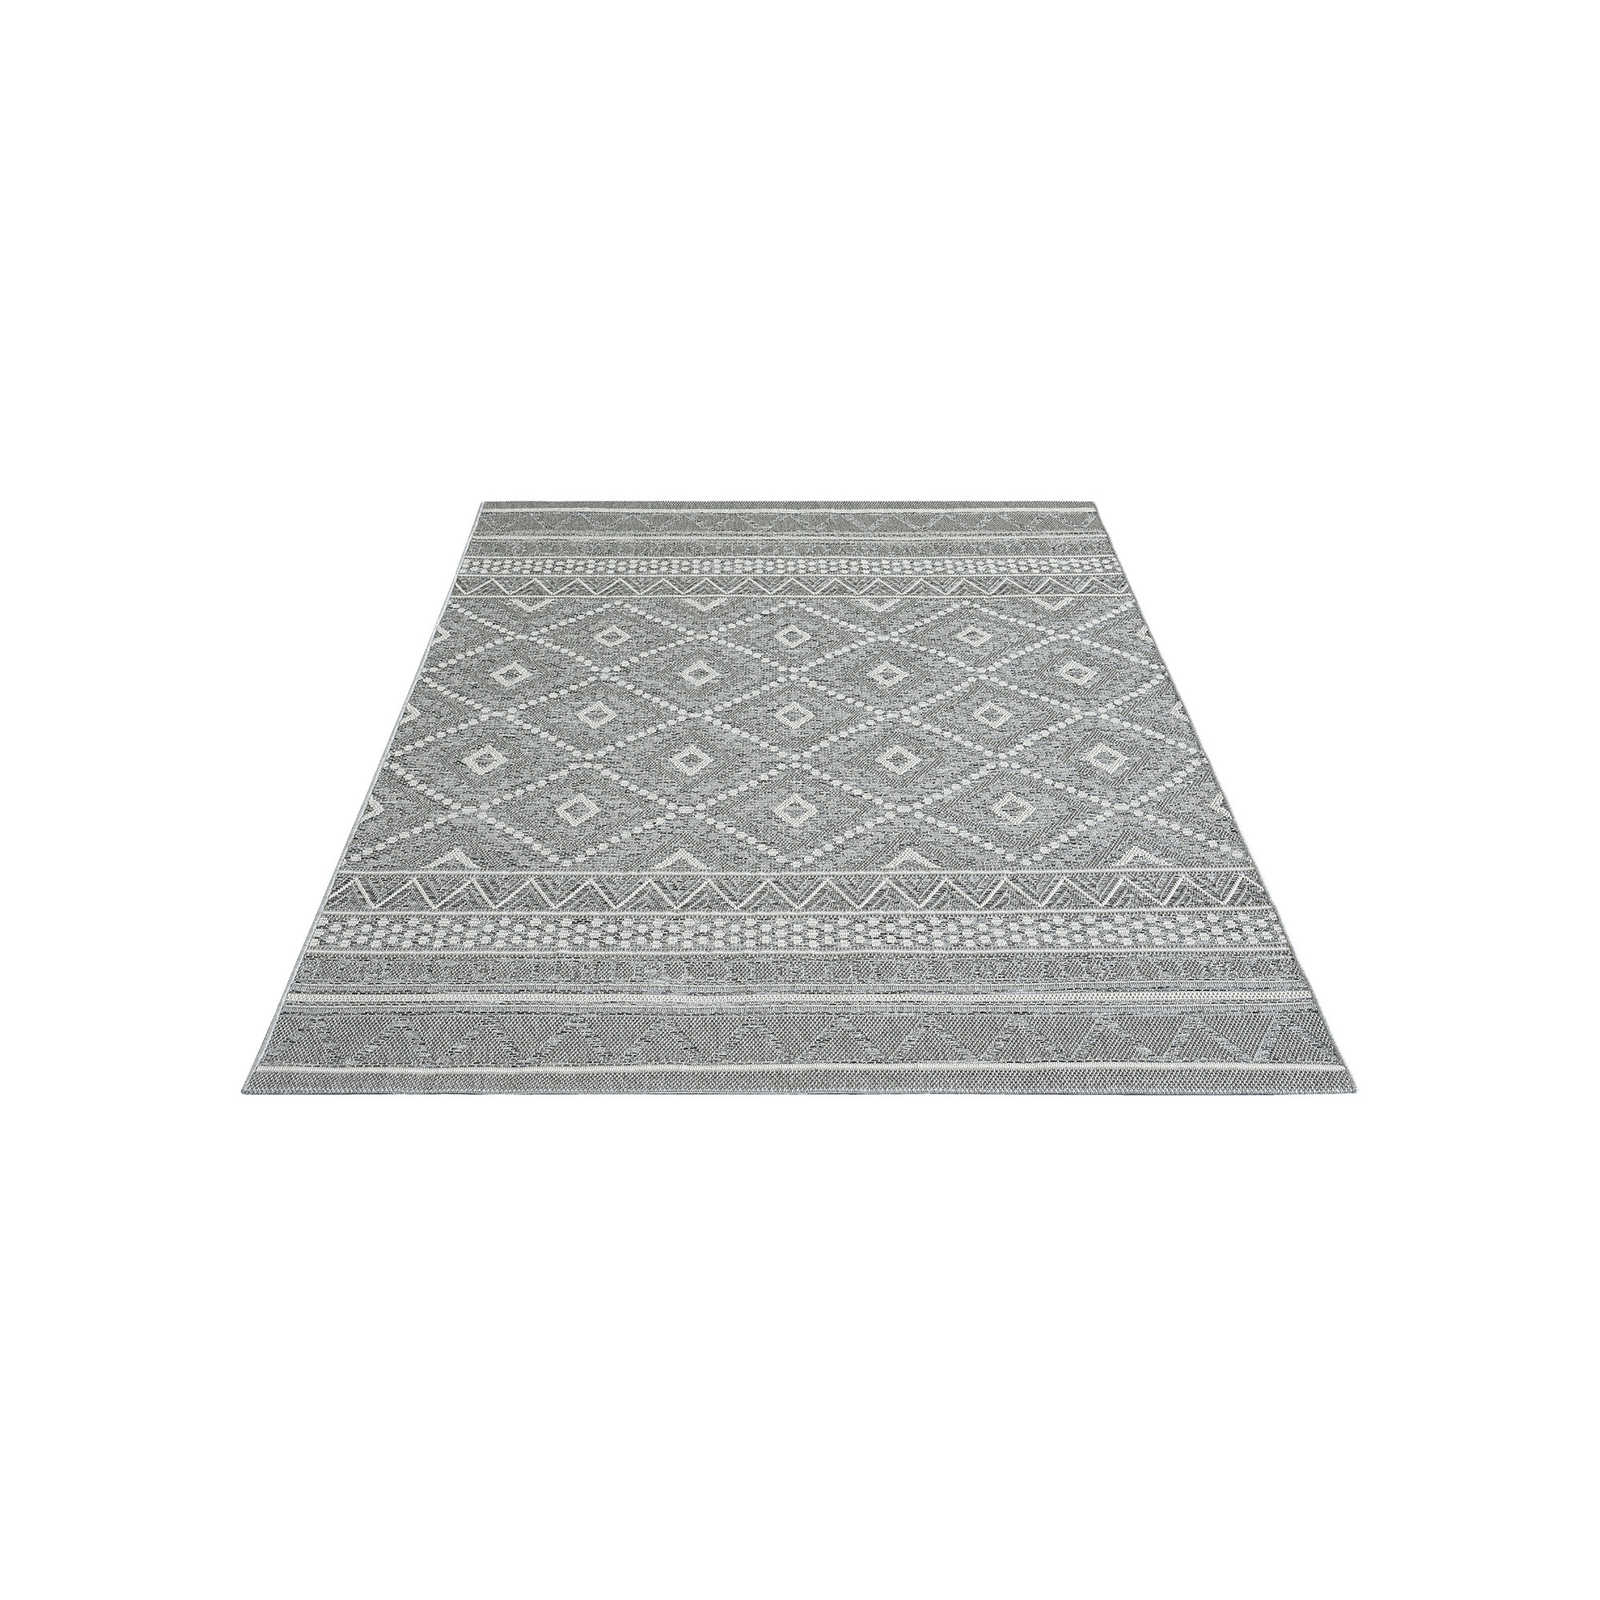 Patterned Outdoor Rug in Grey - 200 x 140 cm
